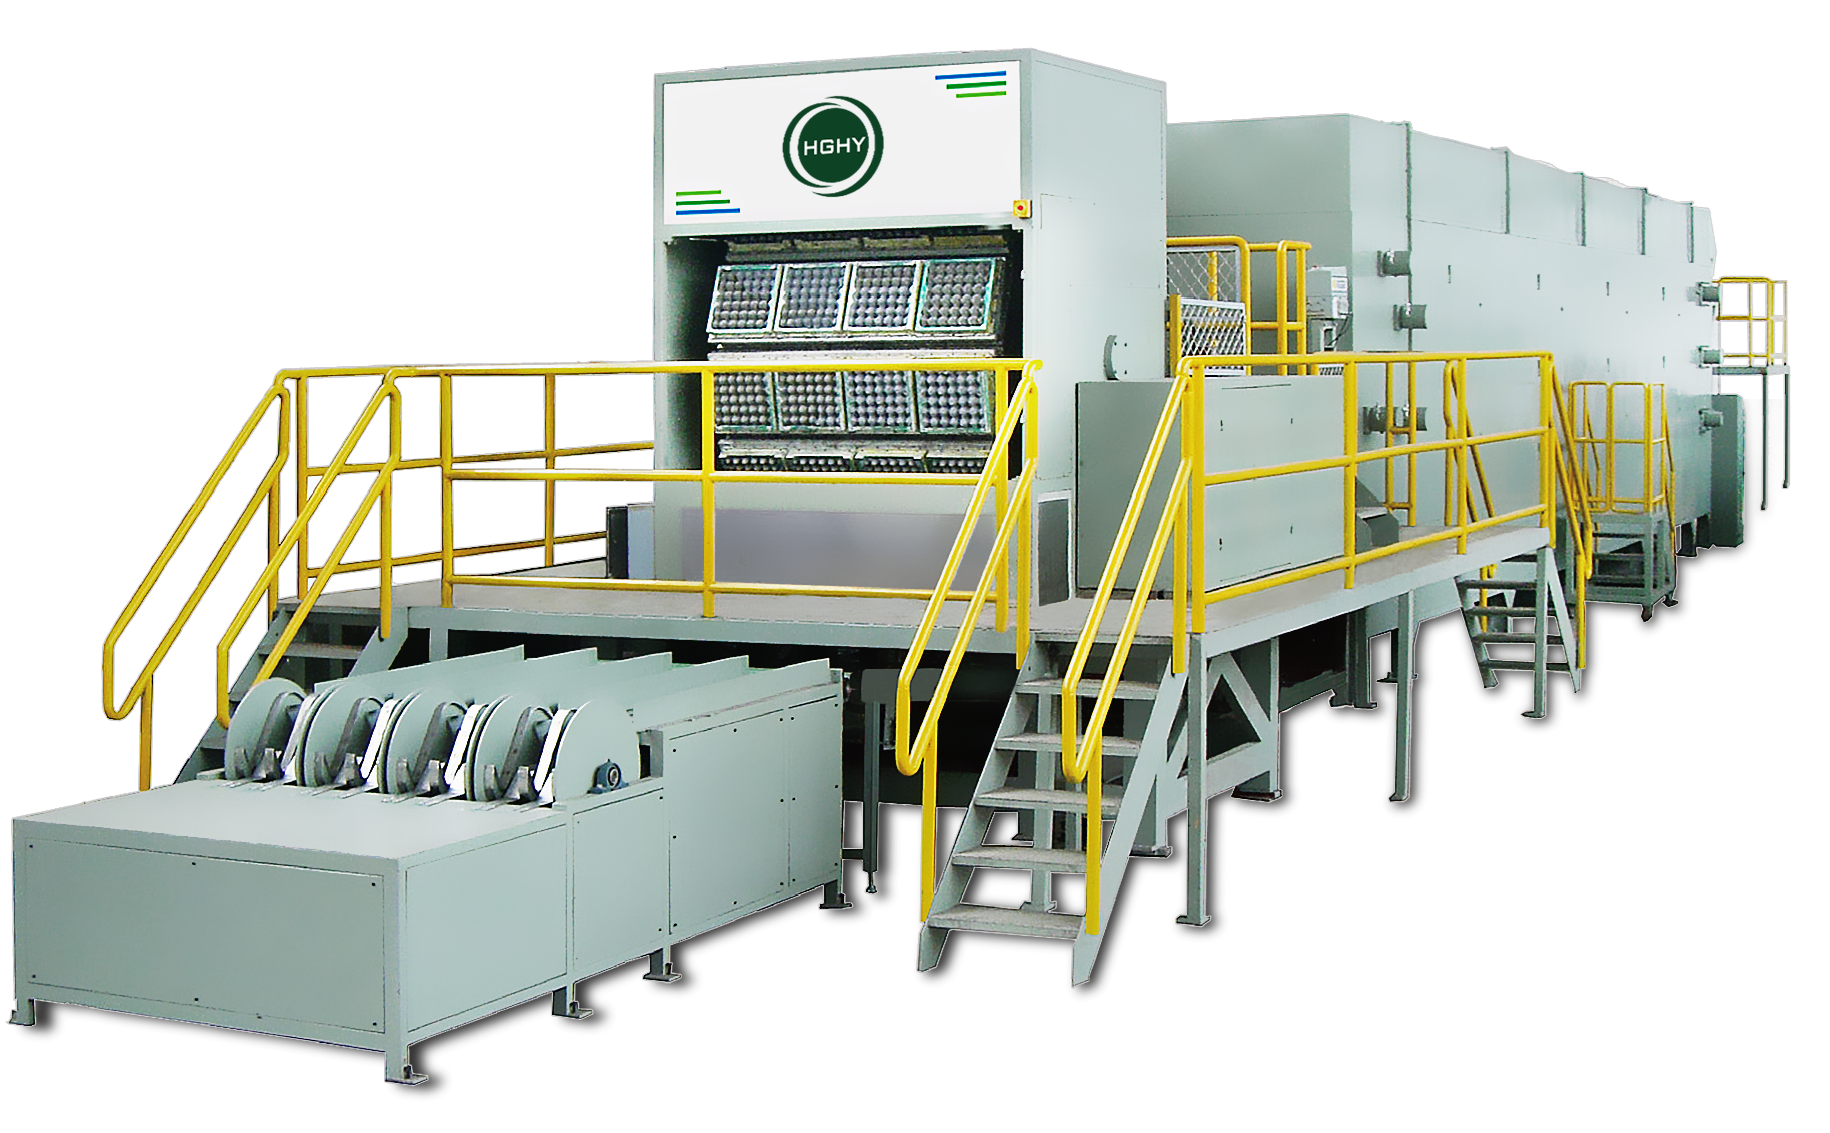 HGHY Eggs Tray Making Machine - 2.?????????????.png - HGHYMachine